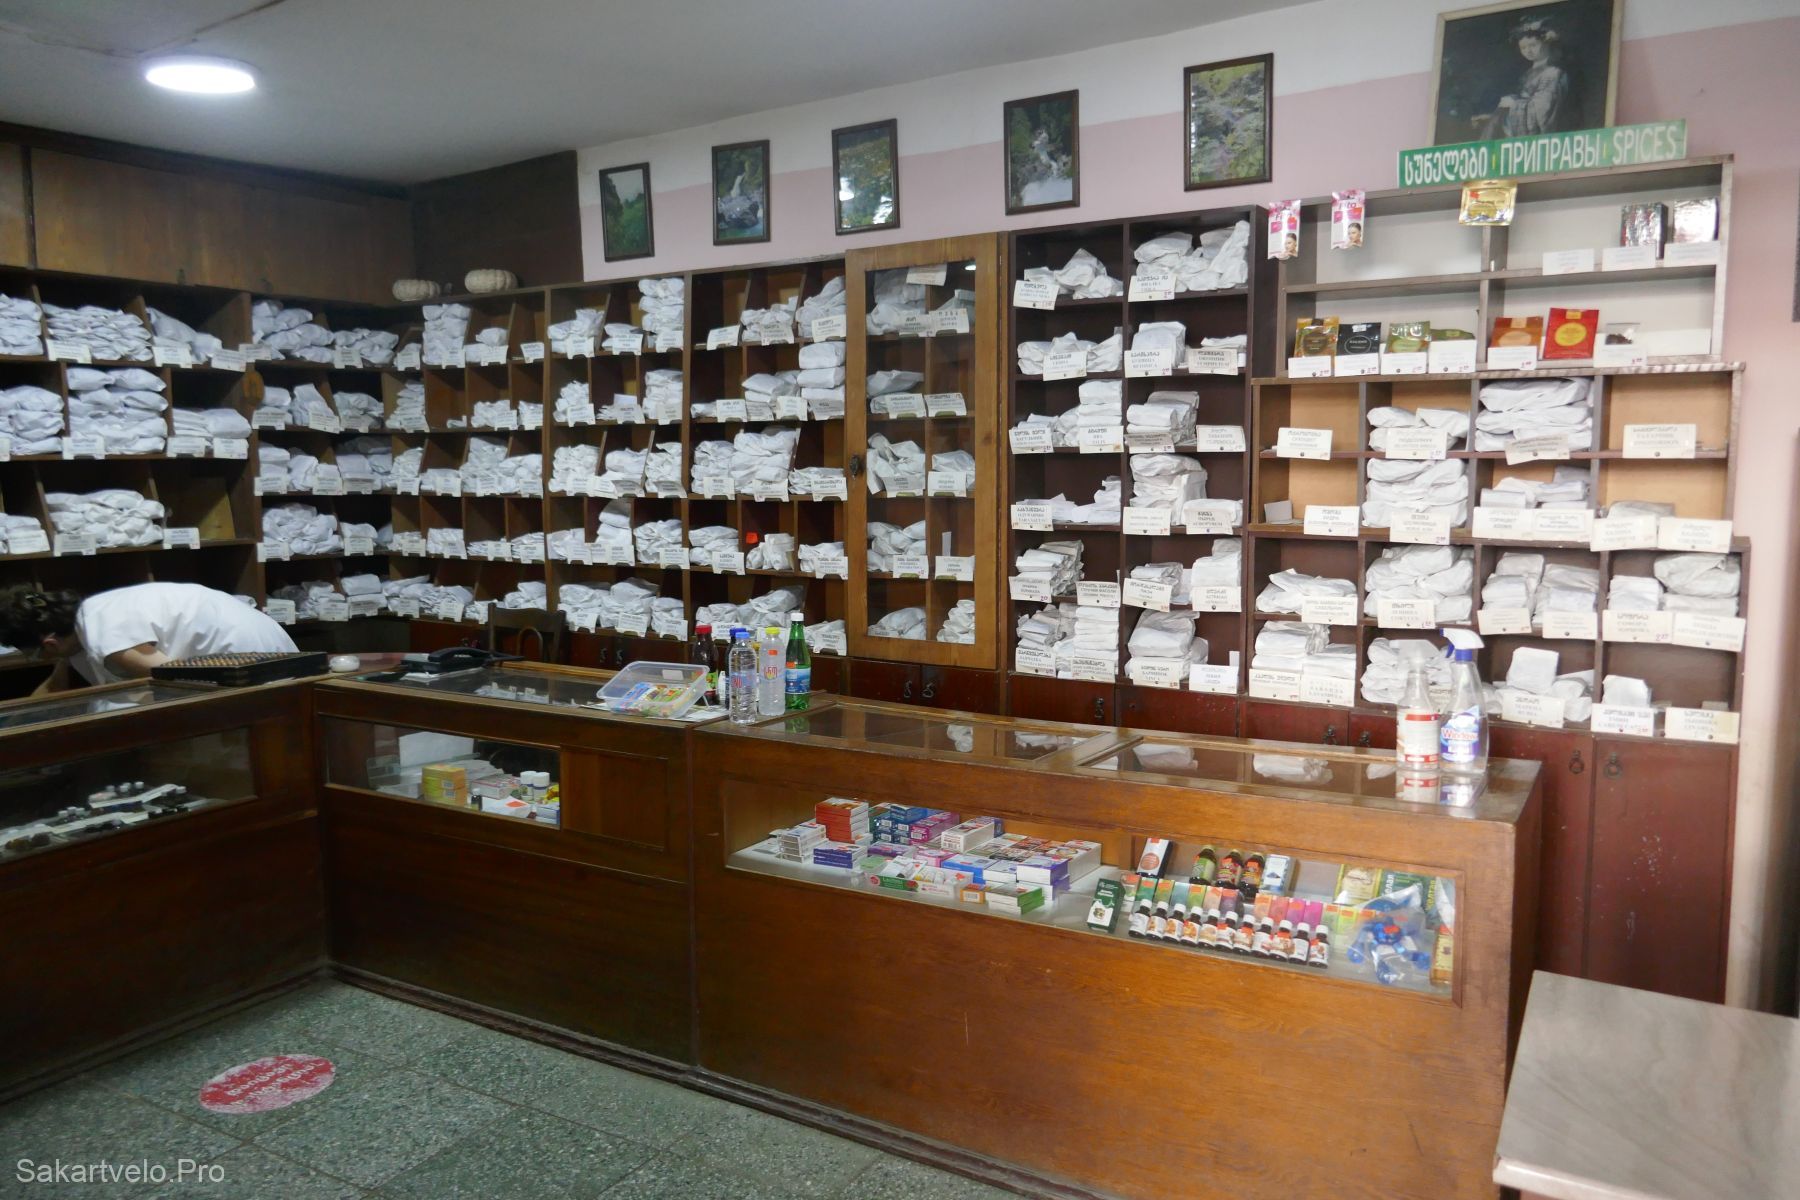 Green pharmacy or where to buy quality medicinal herbs in Tbilisi